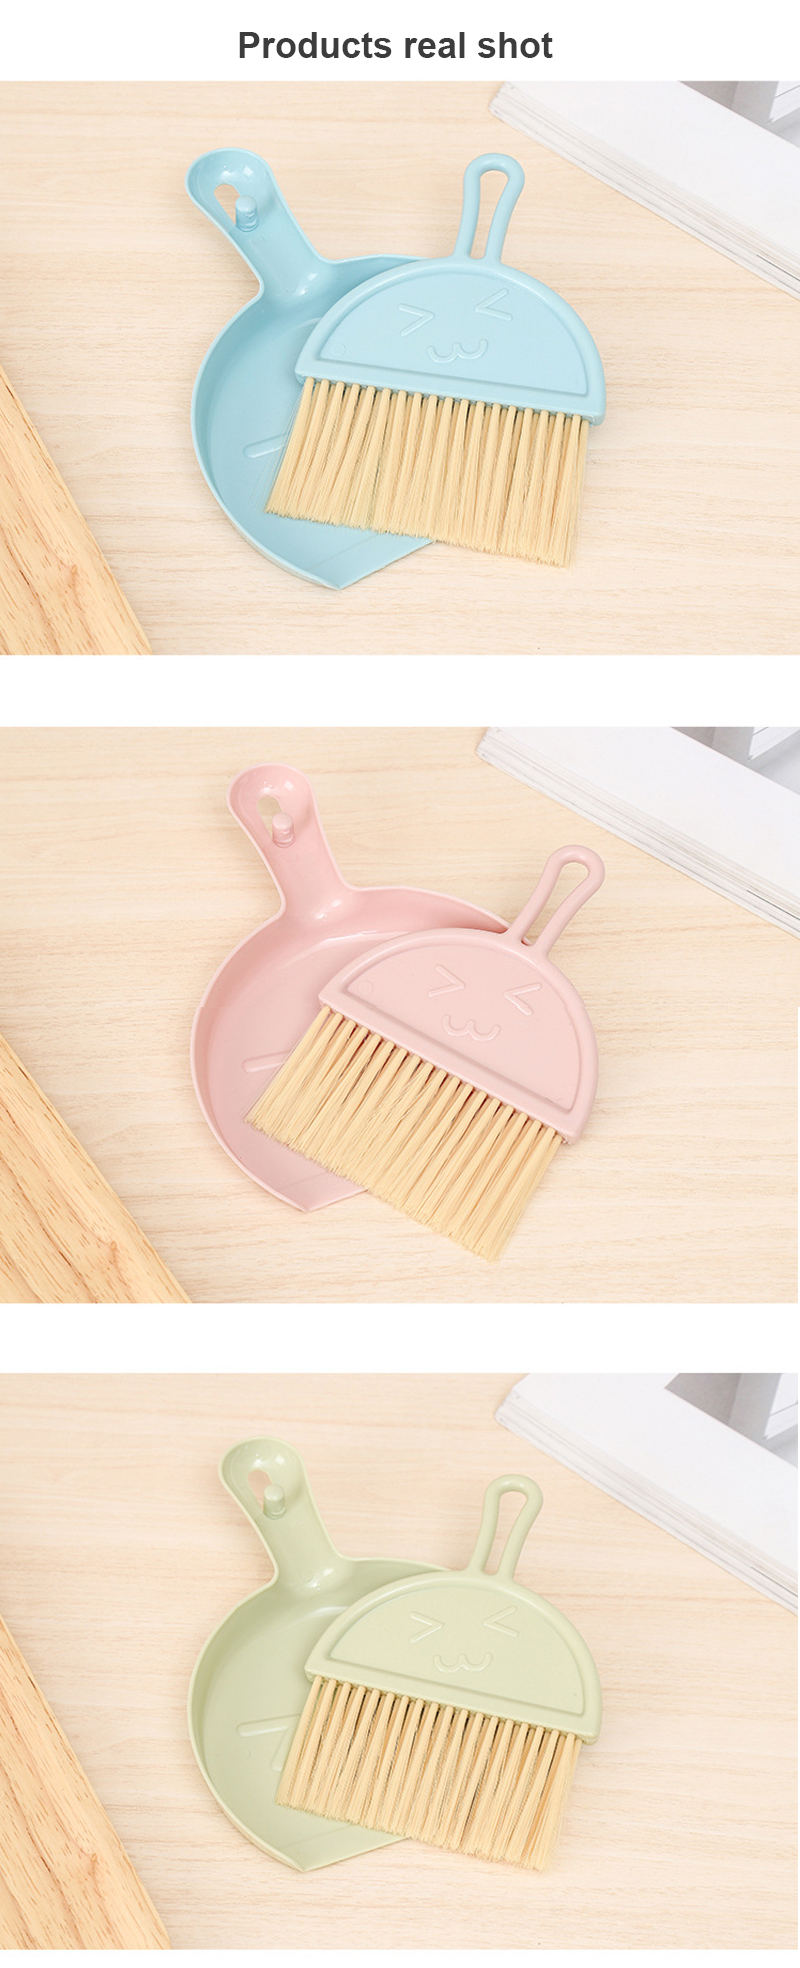 Mini Desk Broom Set Home Keyboard Cleaning Brush Small Broom With Dustpan Set For Home School Office Clean Brush Dropshipping